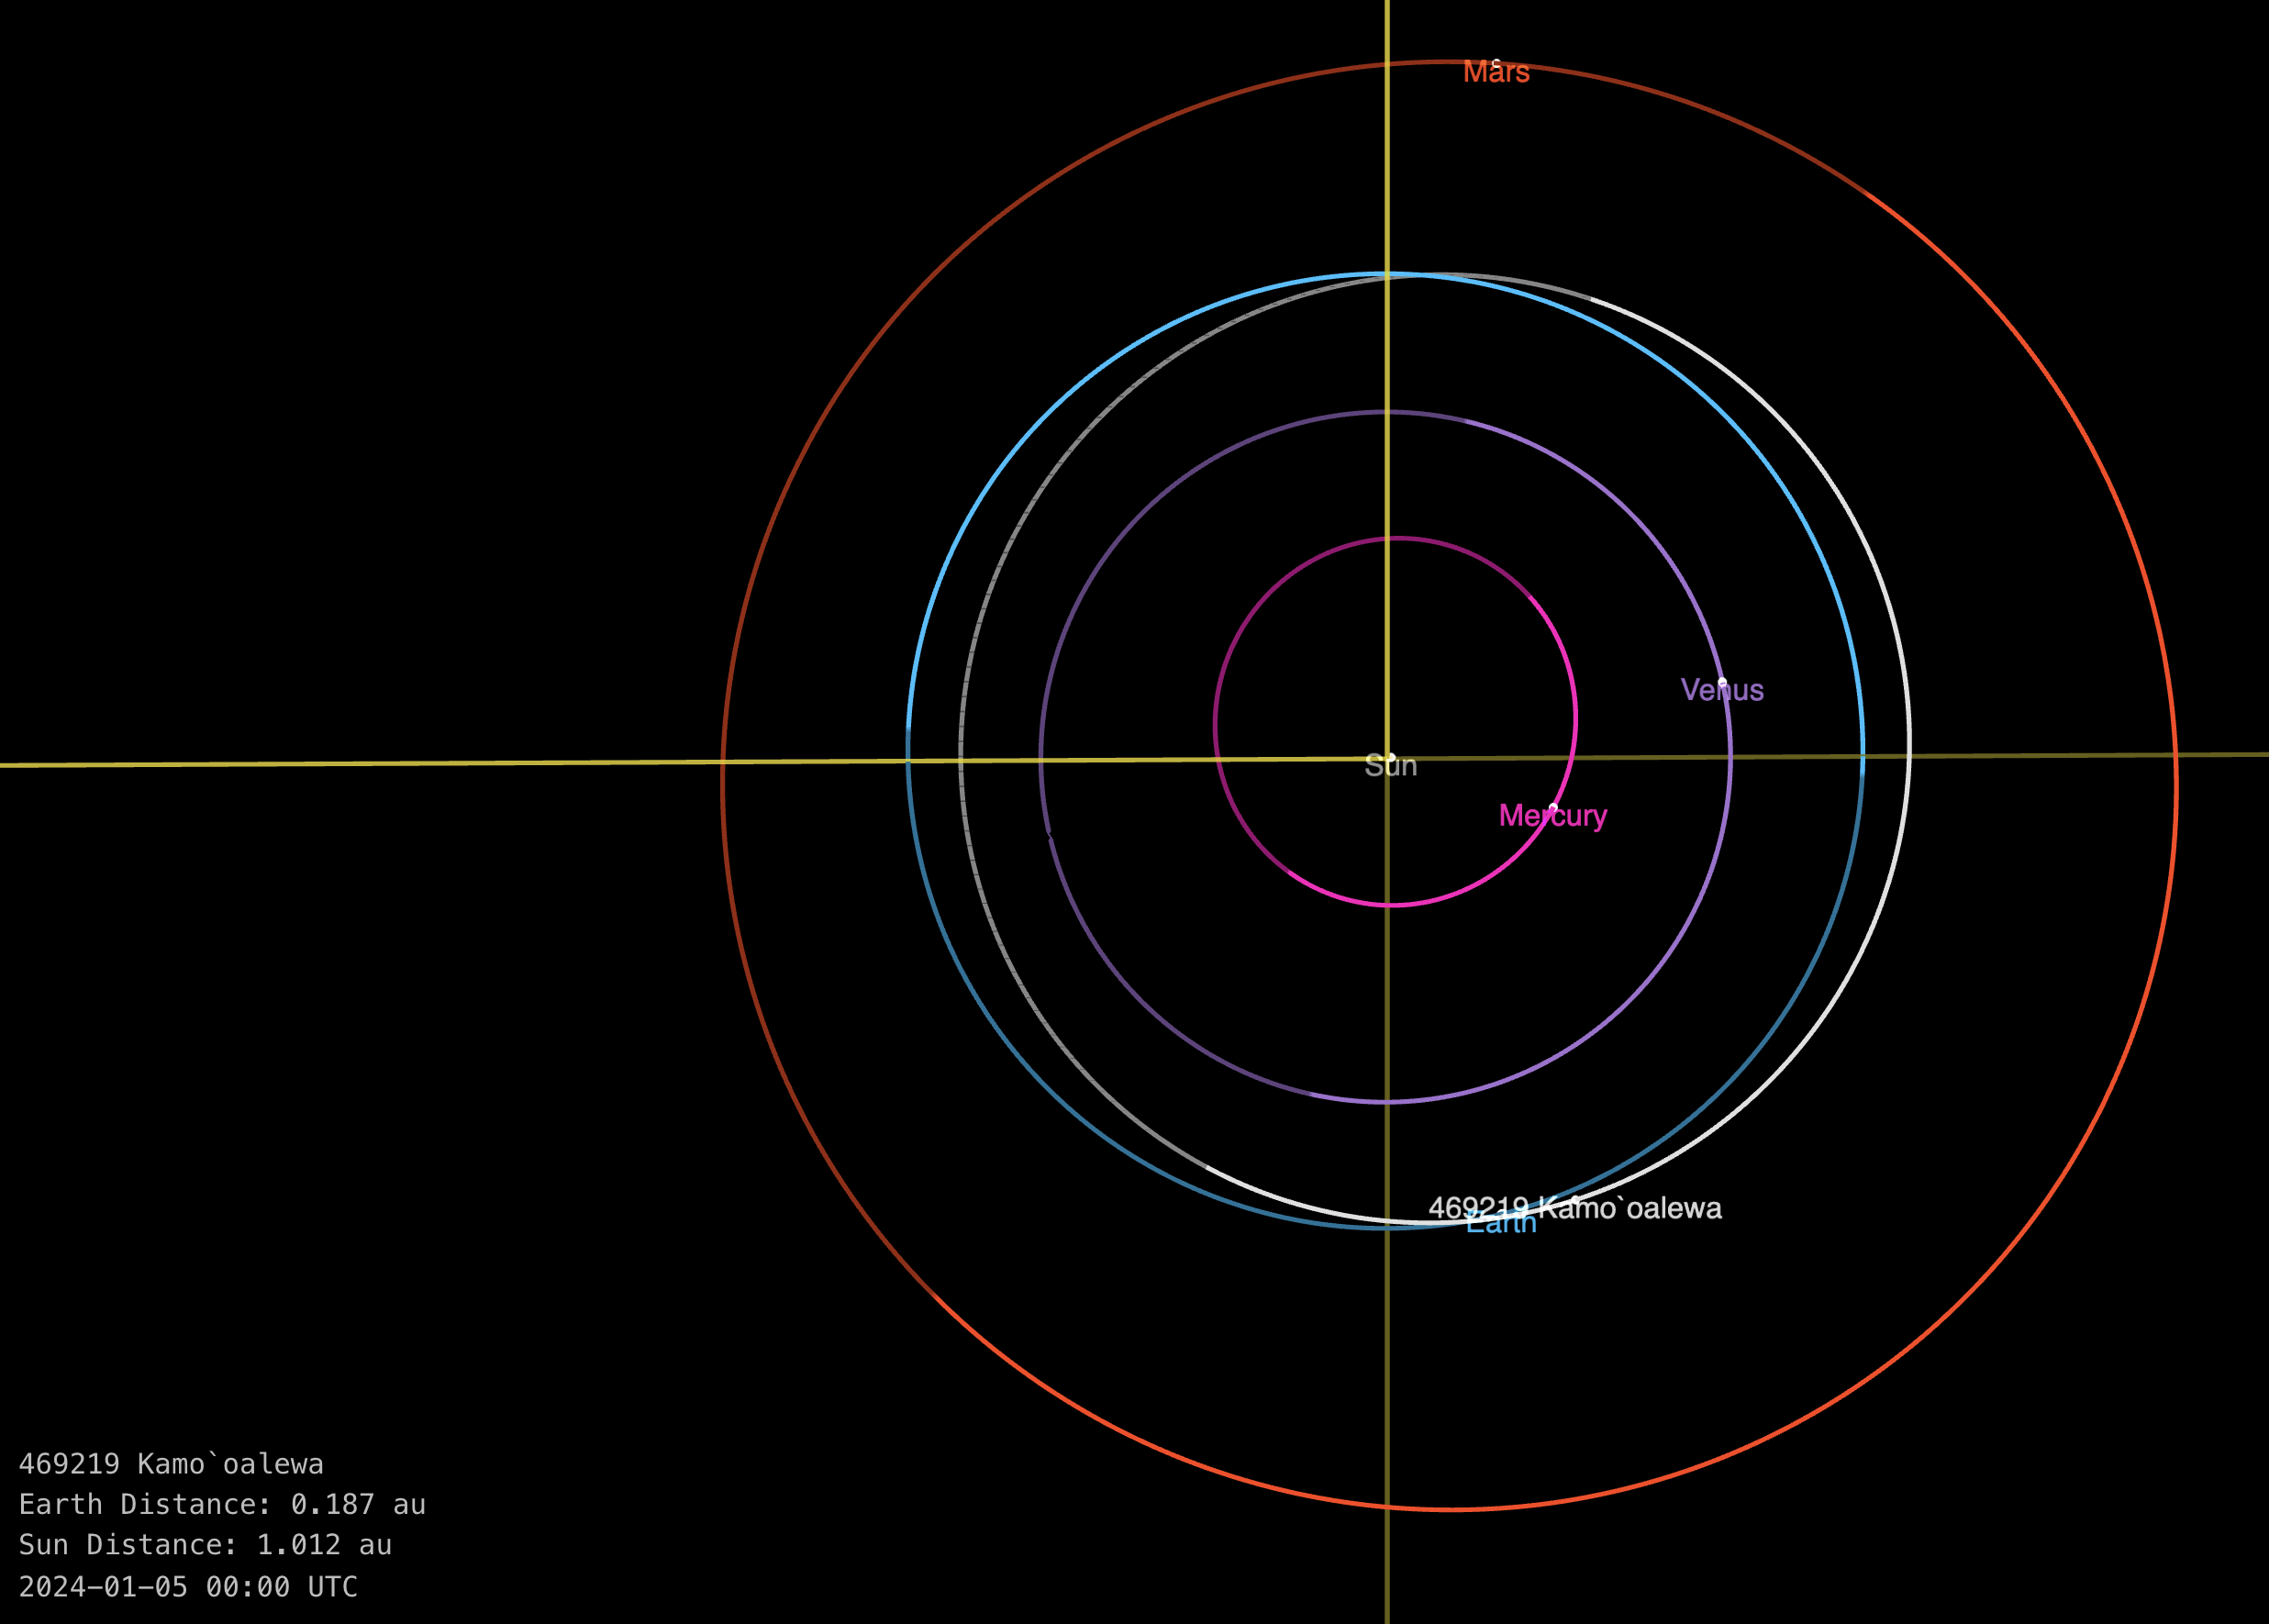 By using the NASA's JPL — Small-body Database Lookup, the orbit of 469219 Kamo'oalewa can be displayed alongside Earth's orbit. The orbits appear to be nearly identical but just shifted. In the bottom-left corner it provides the distance from Kamo'oalewa to Earth and to the Sun. Credit: NASA